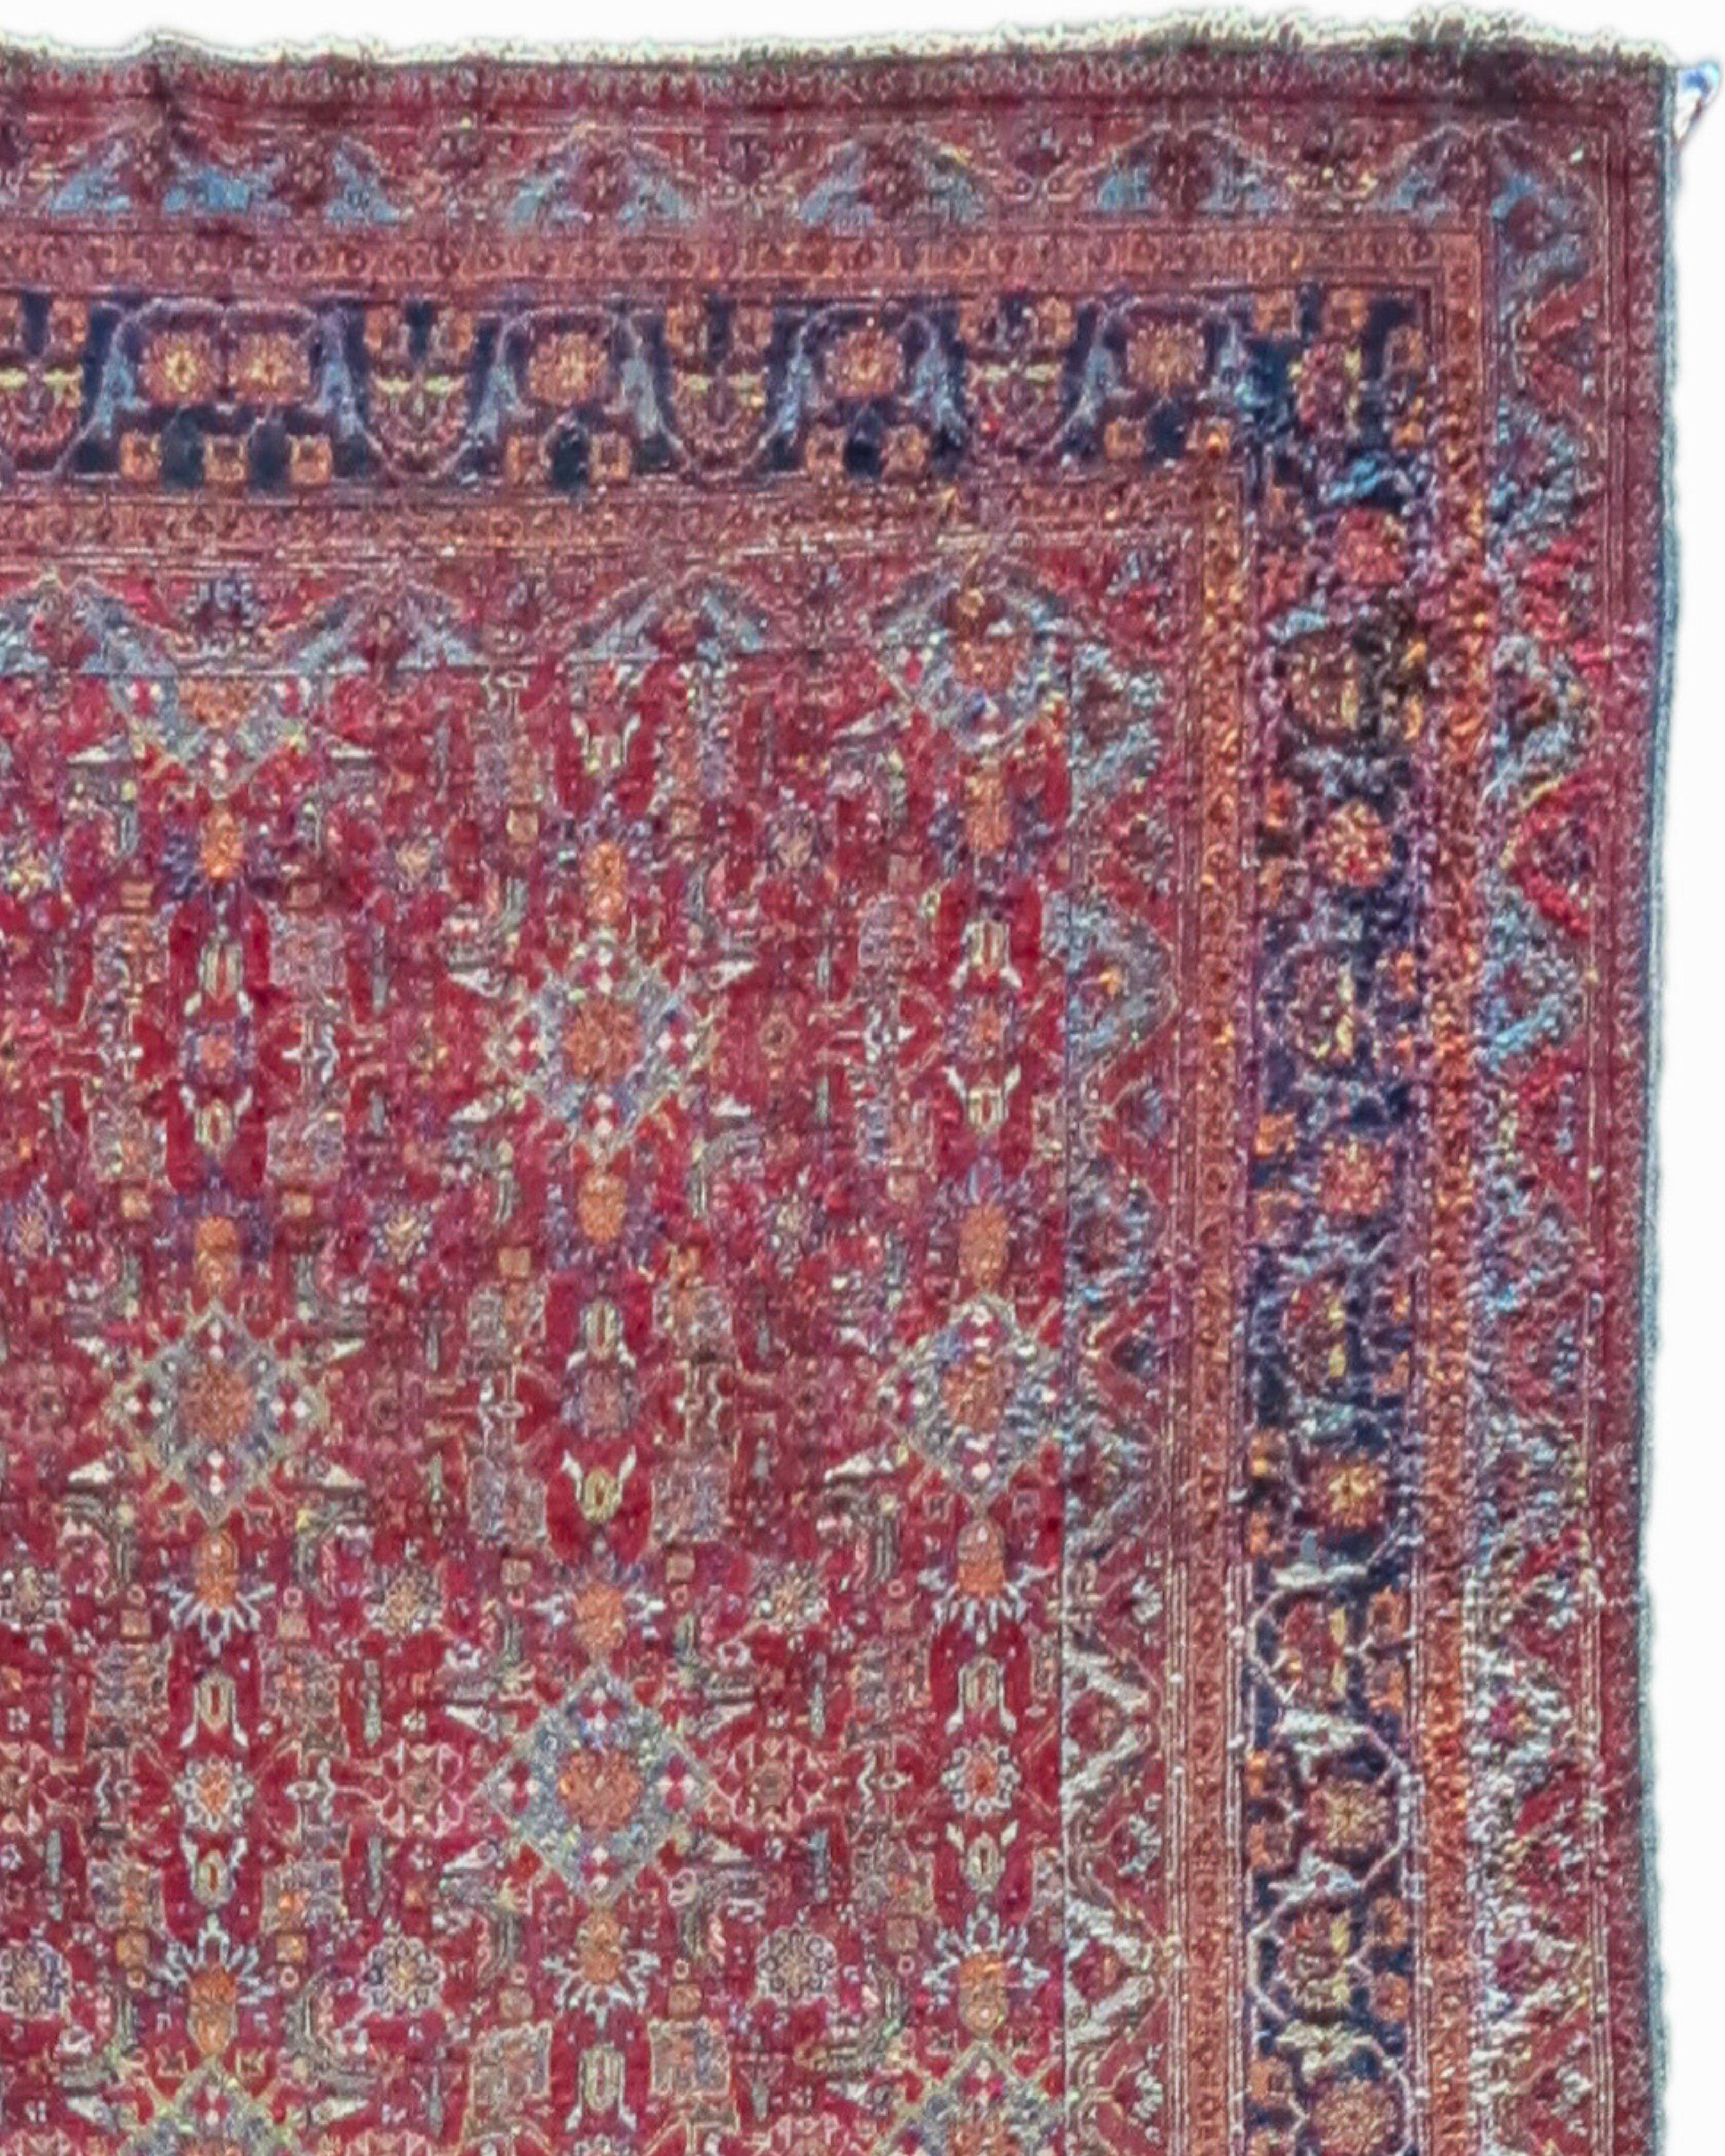 Antique Large Persian Khorassan Carpet, Late 19th Century

Additional Information:
Dimensions: 7'0